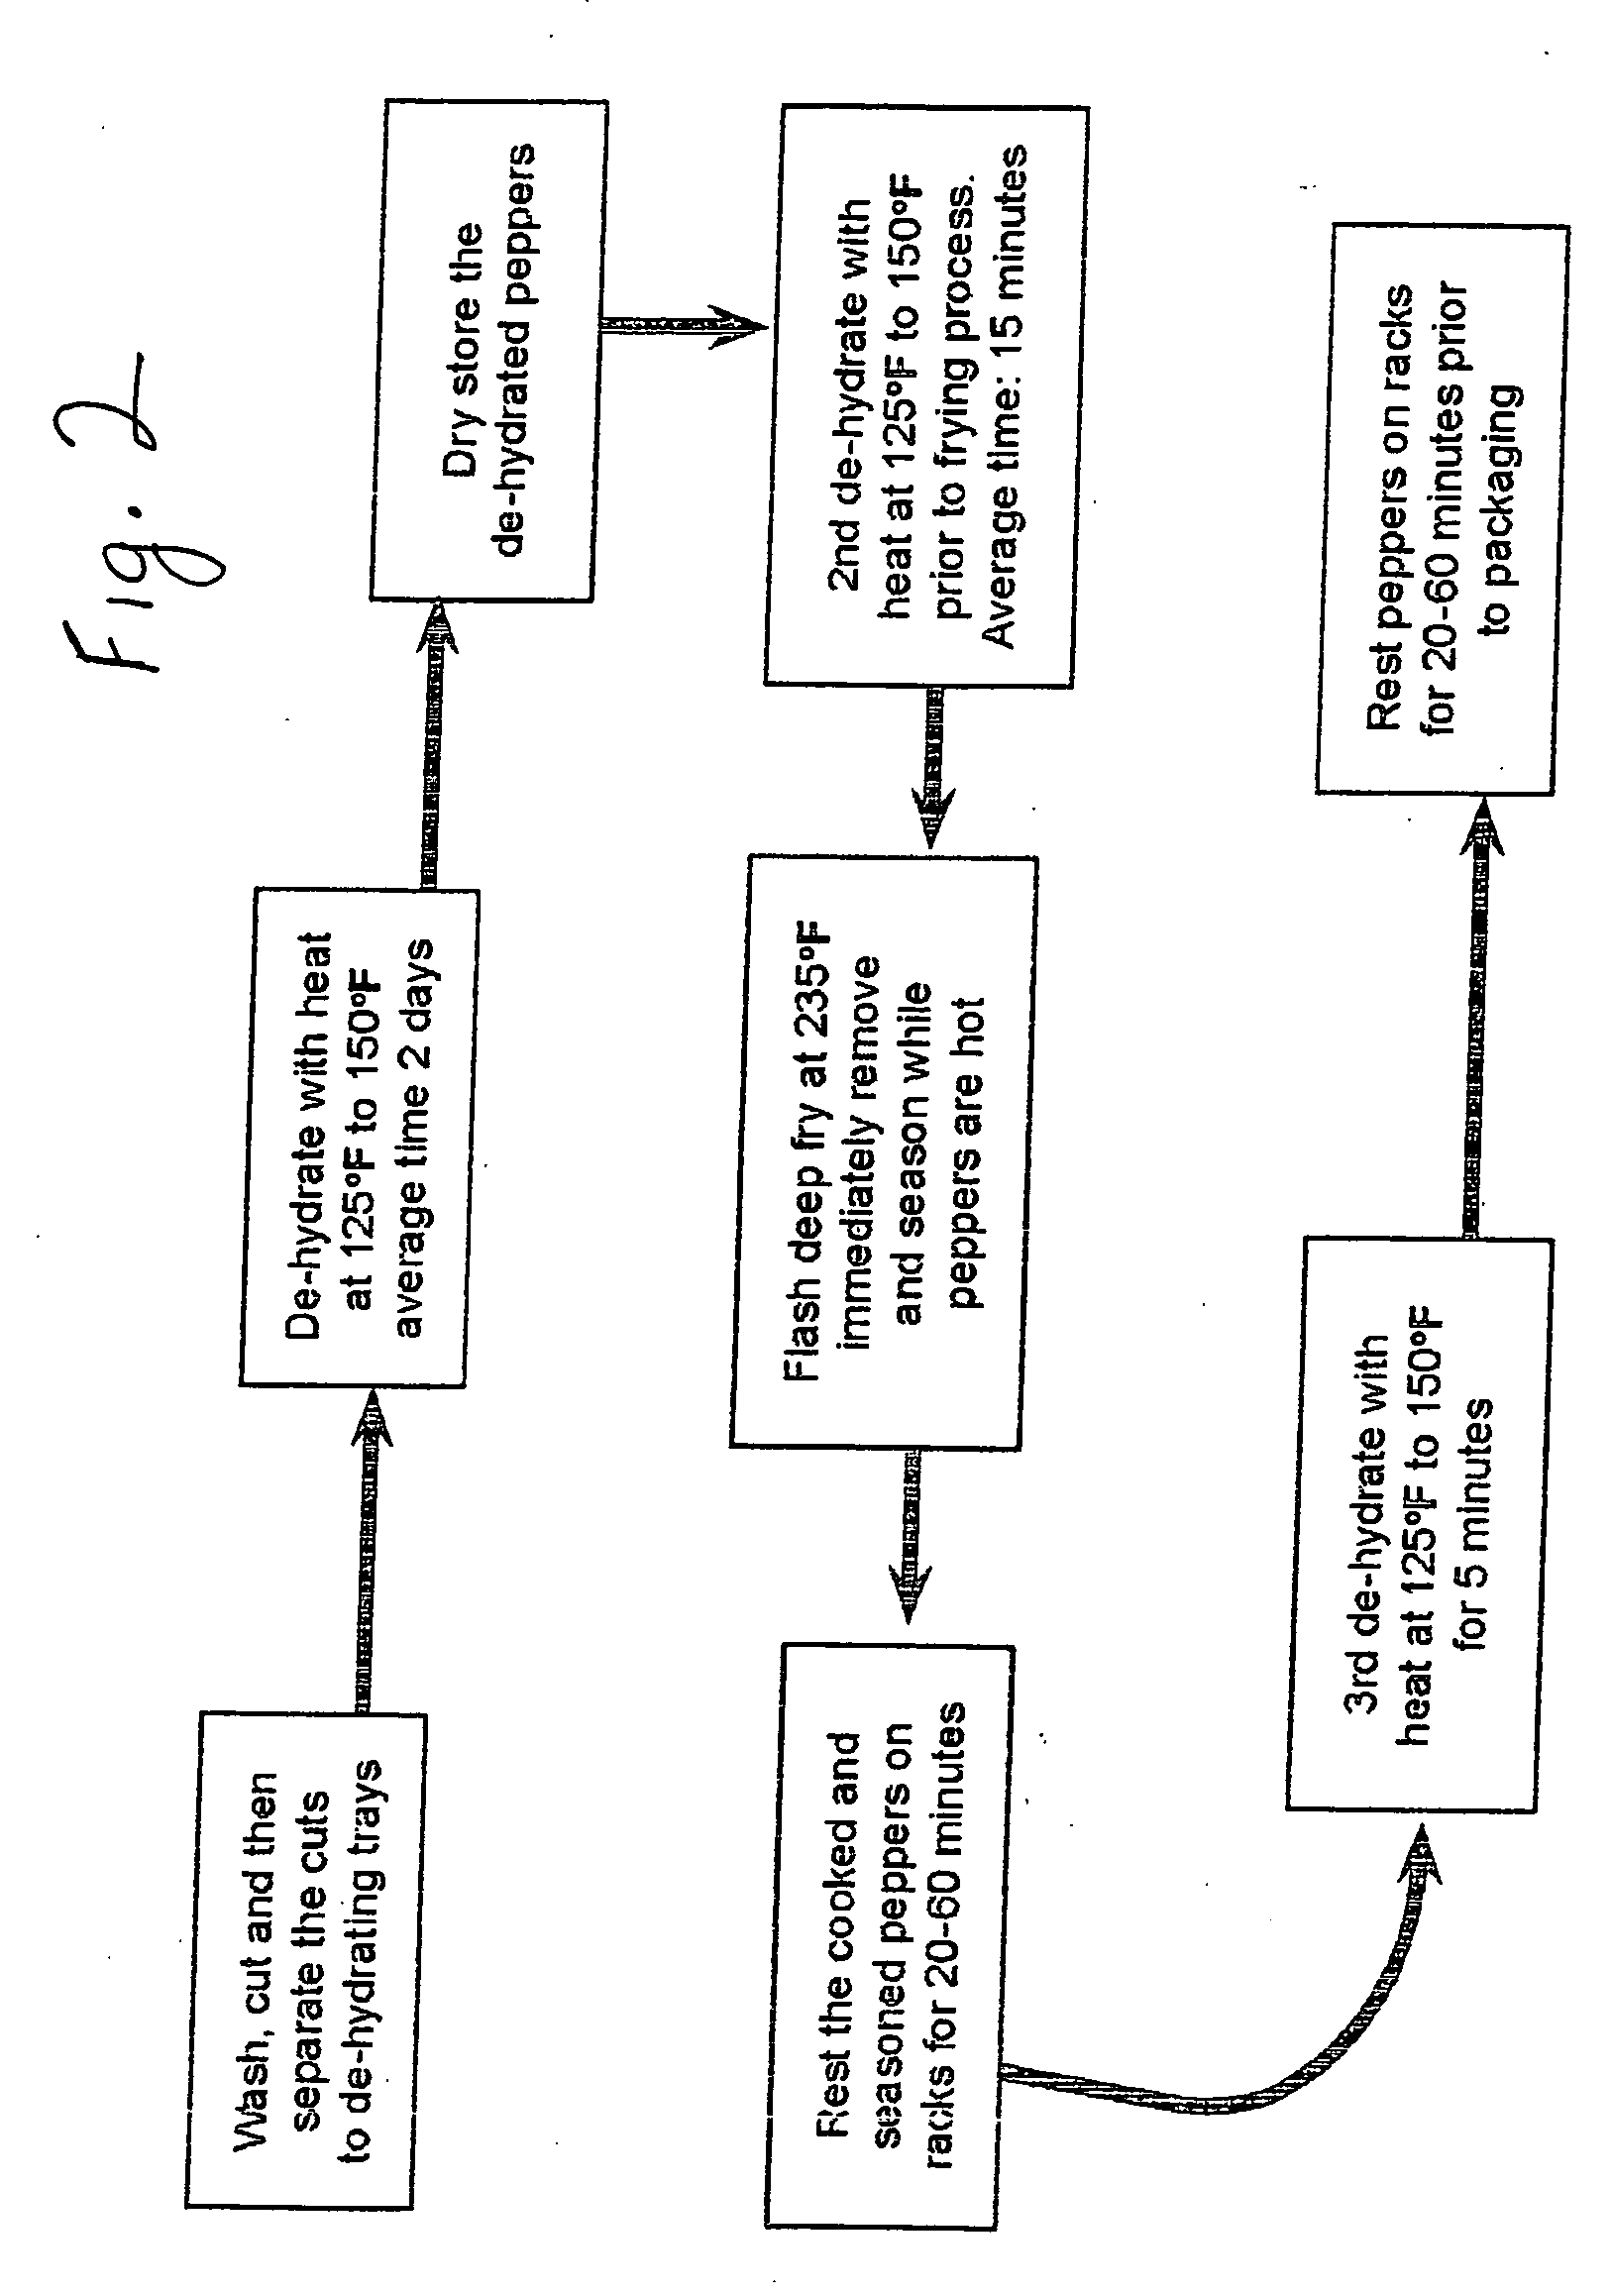 Method for dehydrating peppers or other products and puffing for food